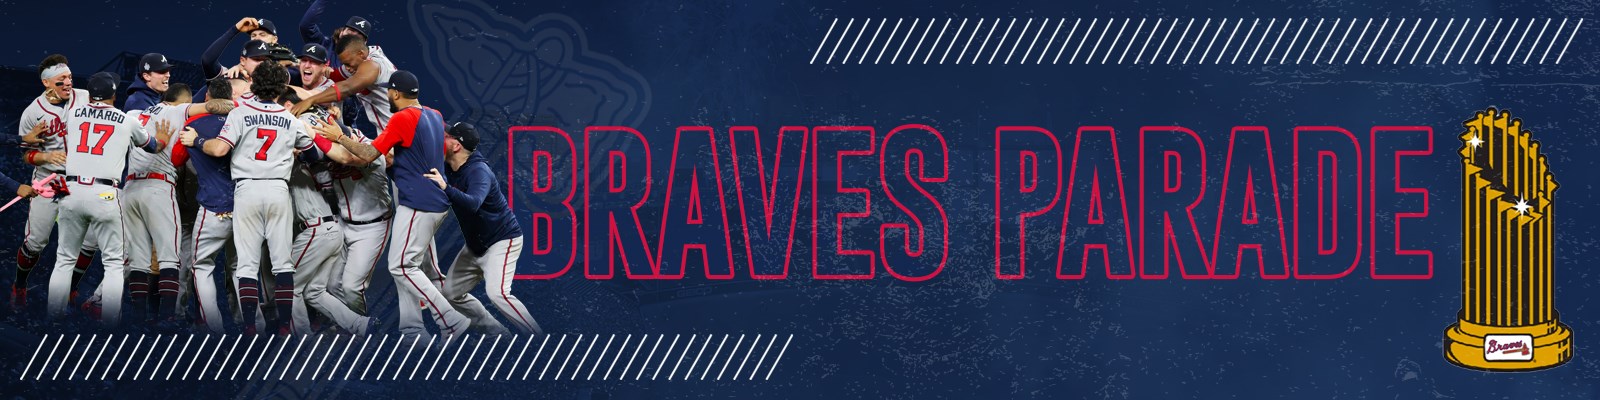 Braves%20Parade.png